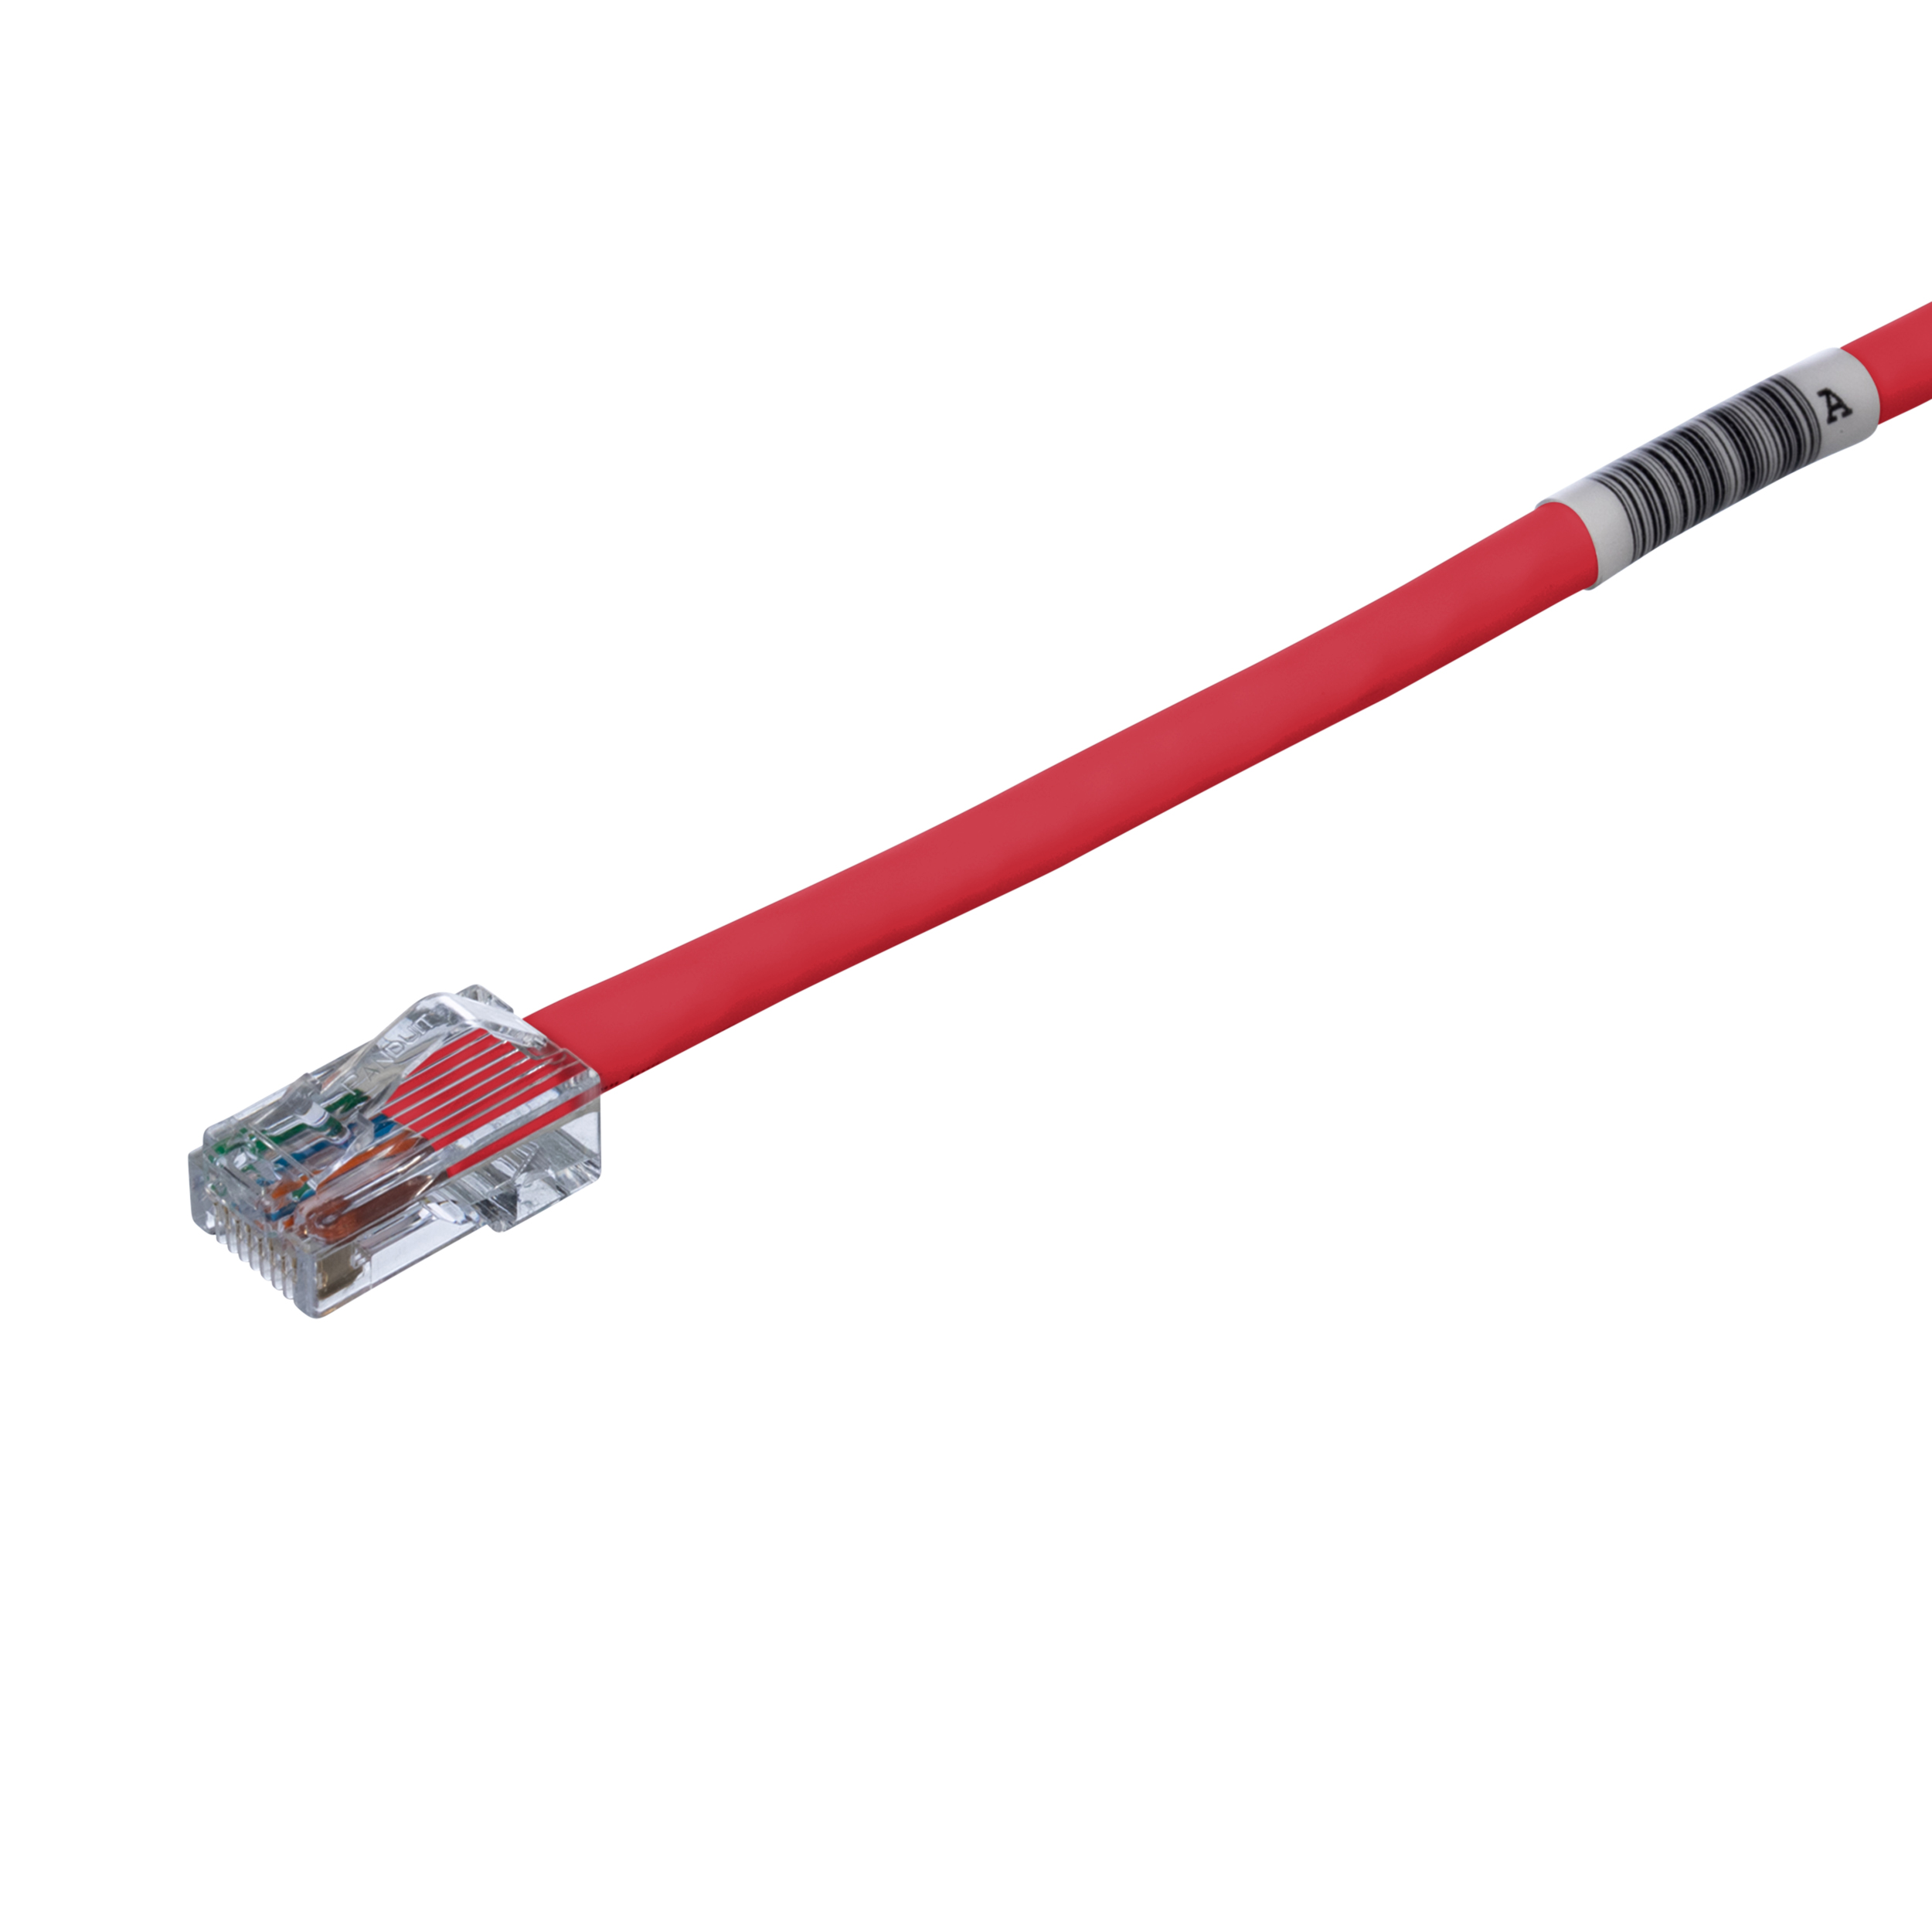 Cat 5e 24 AWG UTP Copper Patch Cord, 2 ft, Red